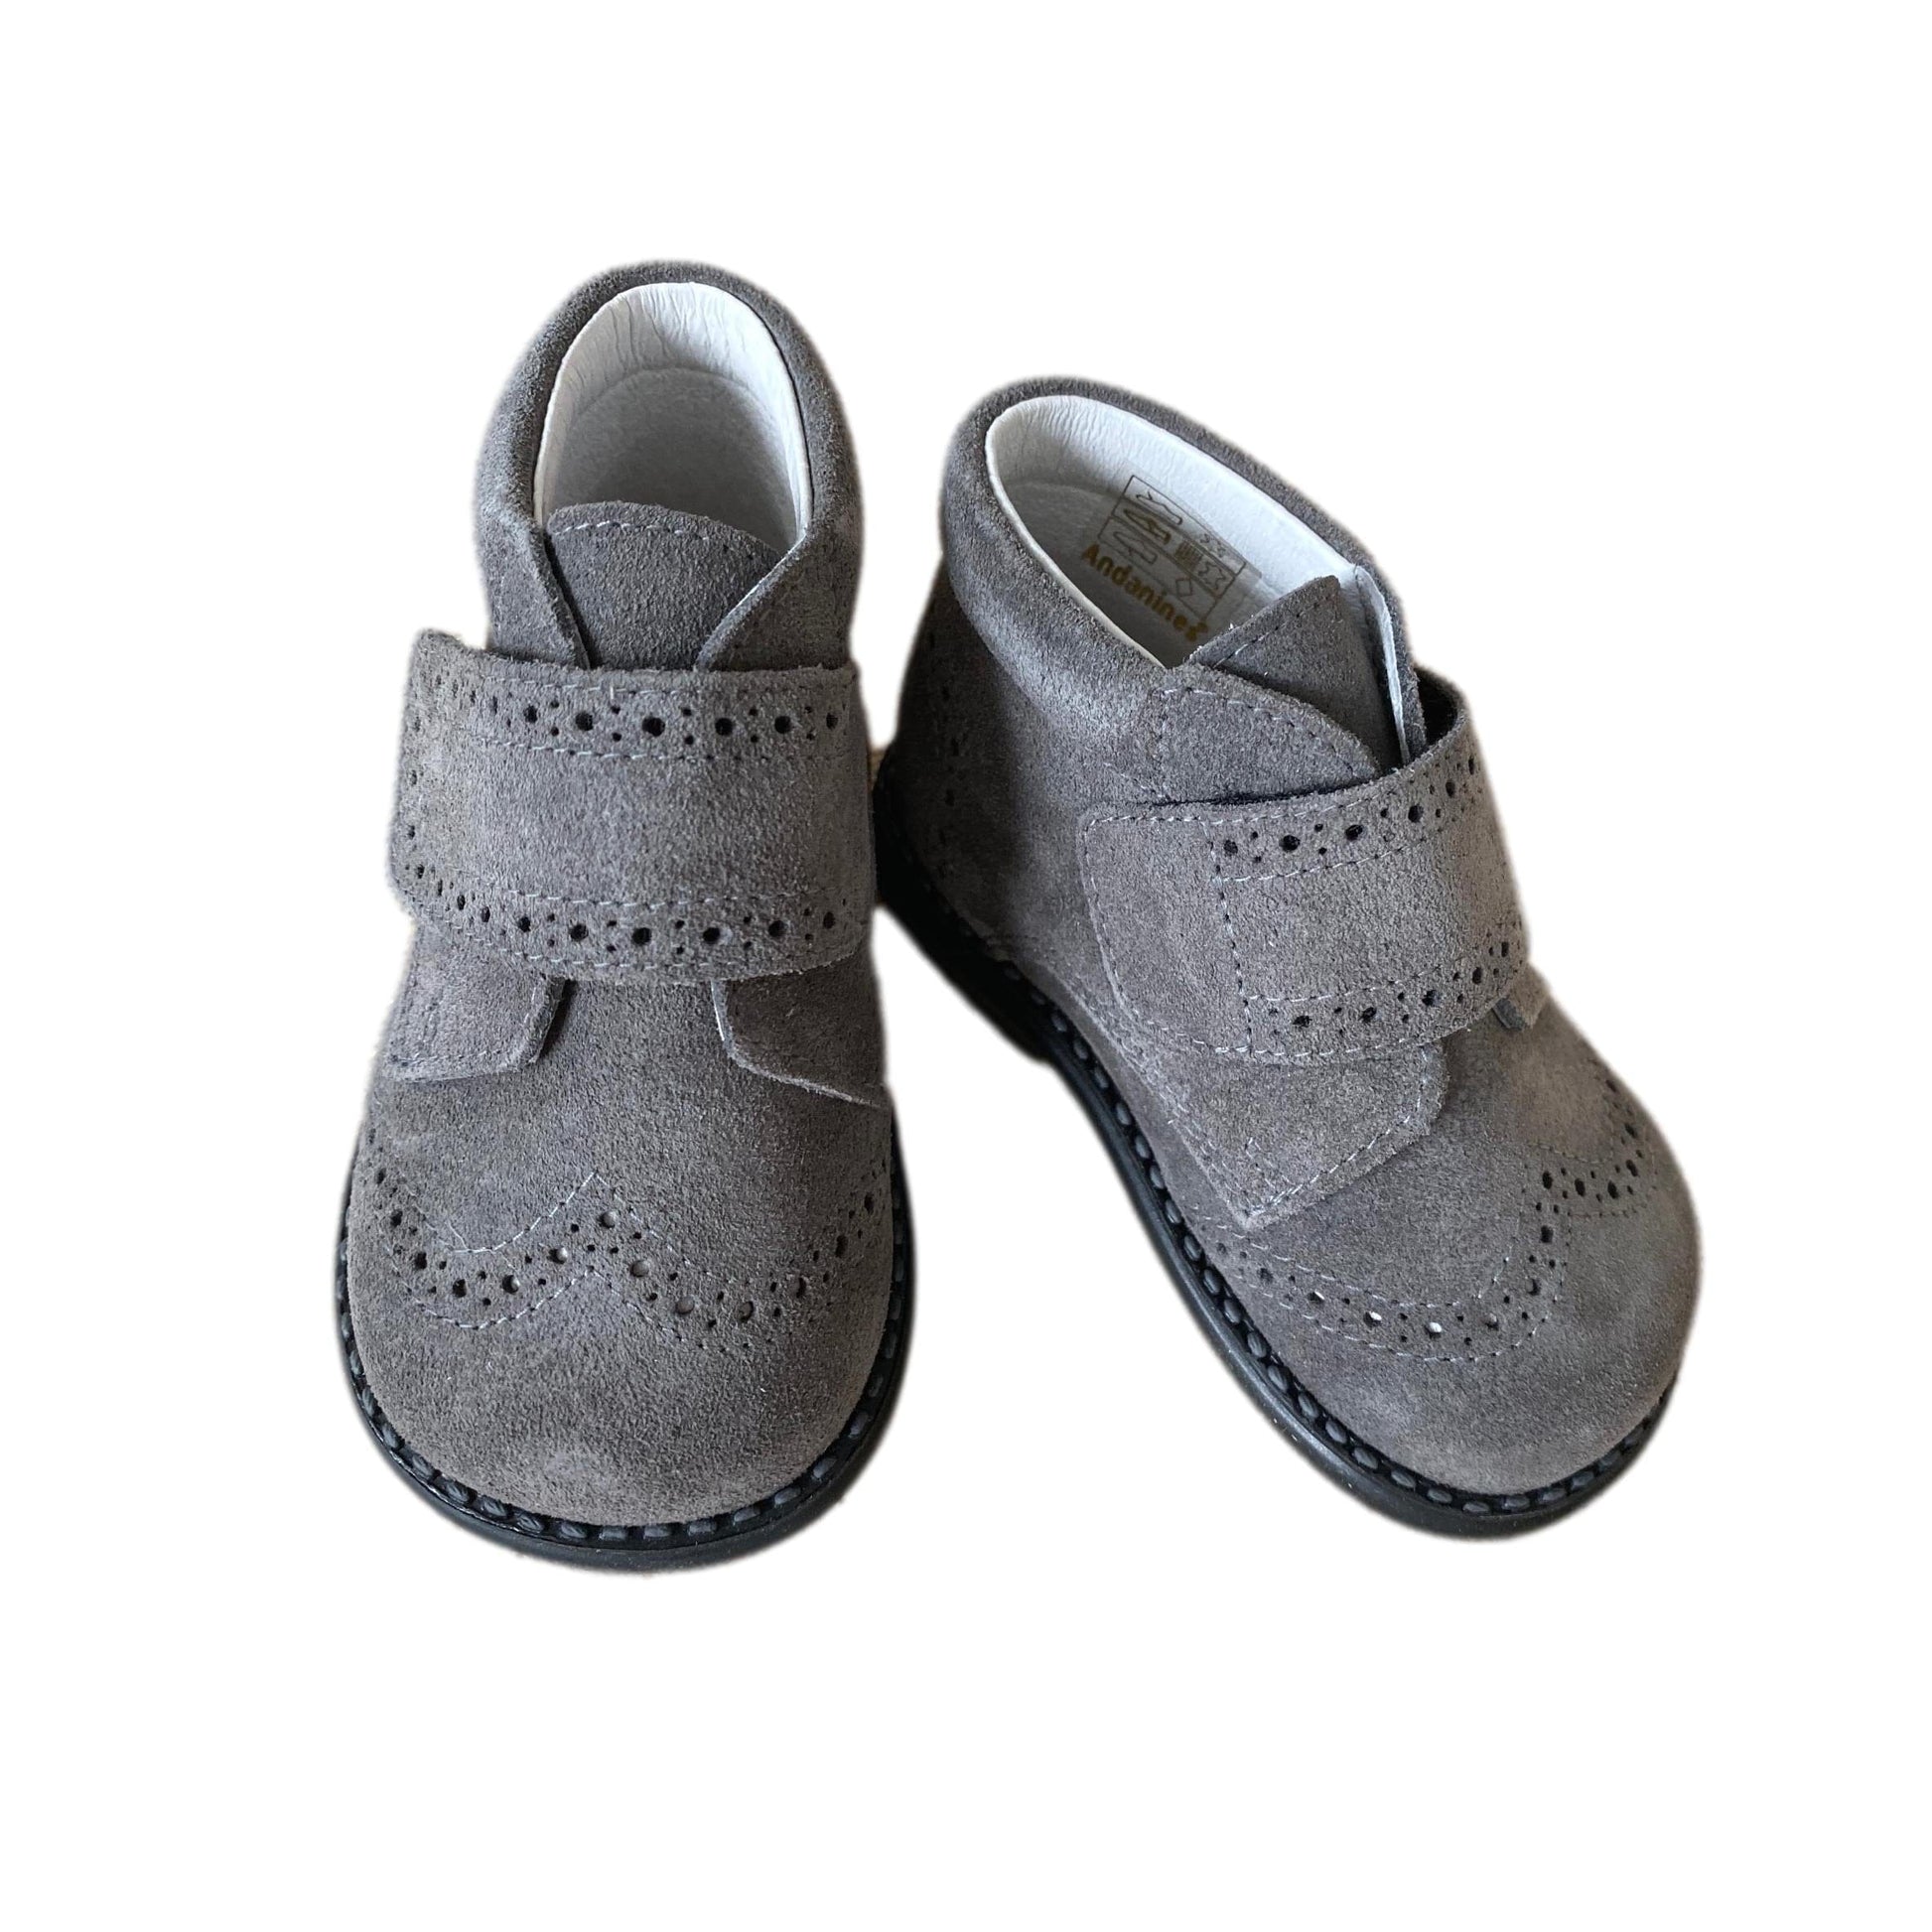 Andy Suede Booties - Petit Maison Kids